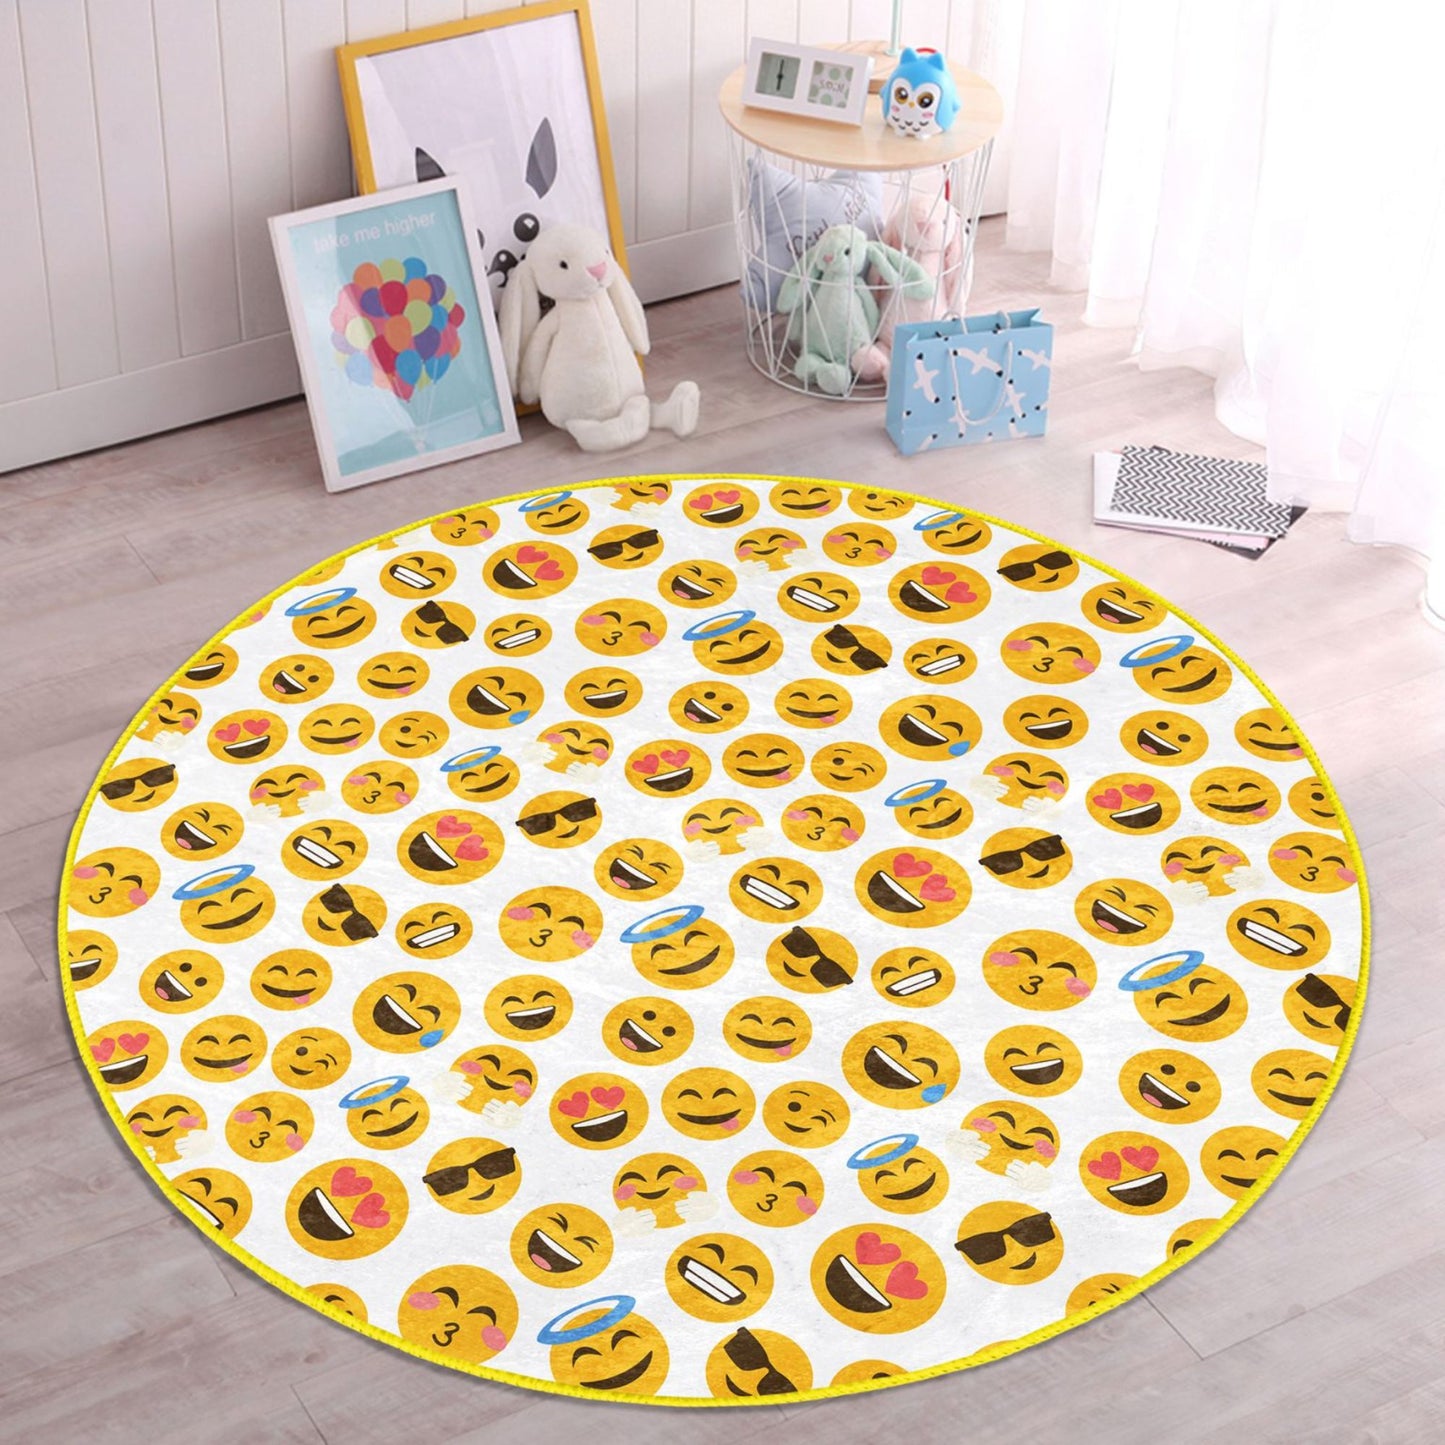 Rug with Emoji Design for Kids' Play Area